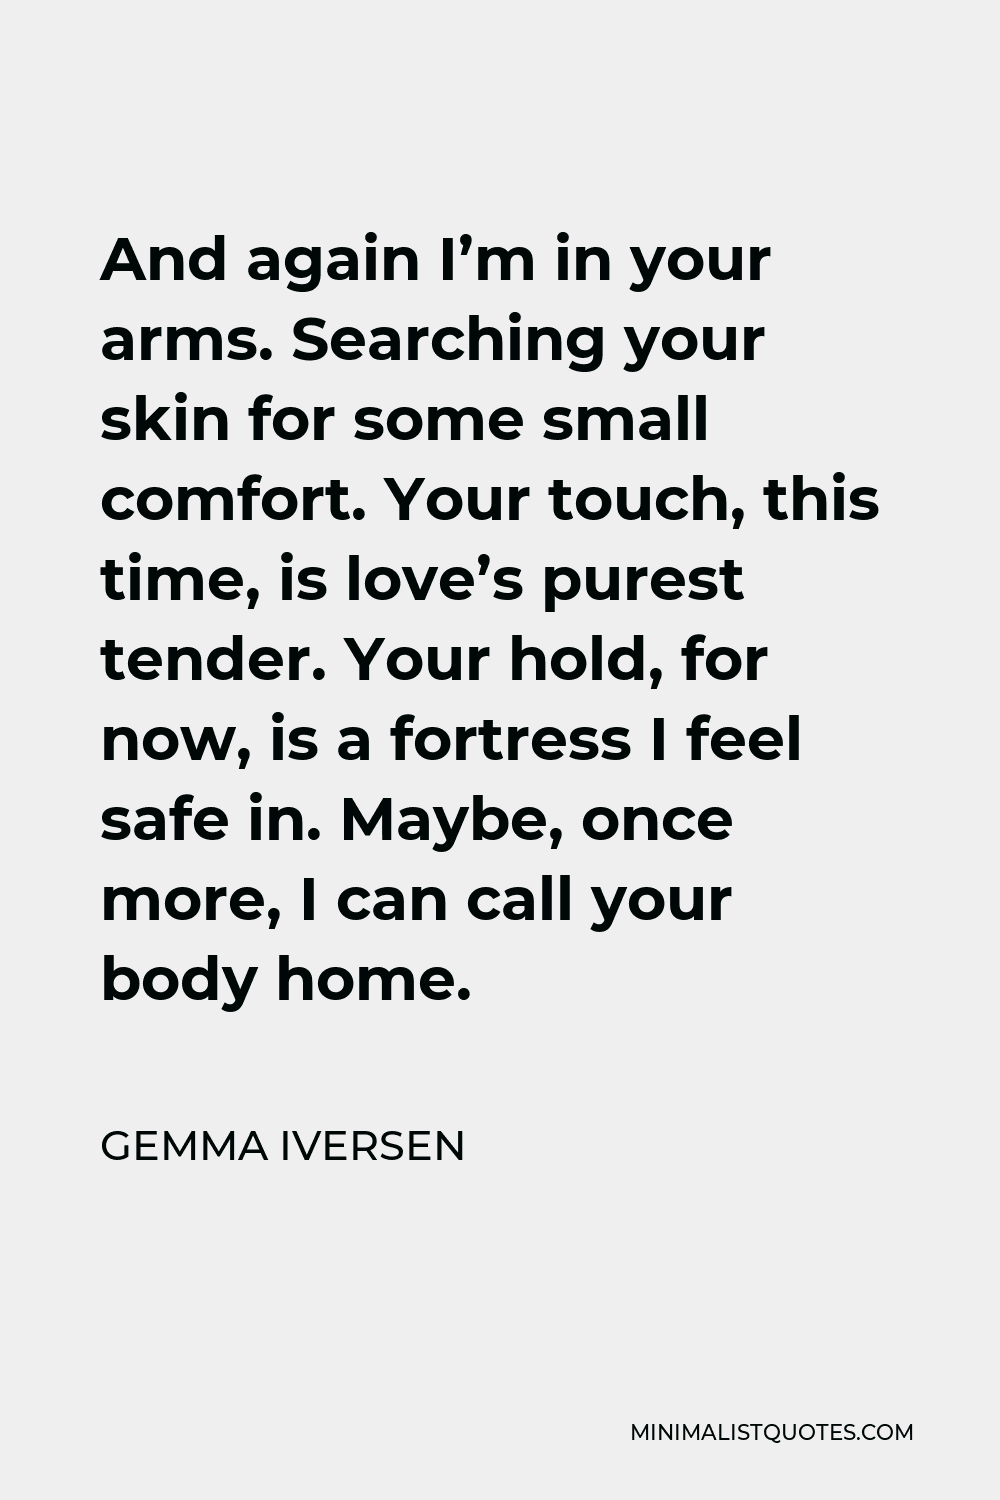 Gemma Iversen Quote - And again I’m in your arms. Searching your skin for some small comfort. Your touch, this time, is love’s purest tender. Your hold, for now, is a fortress I feel safe in. Maybe, once more, I can call your body home.